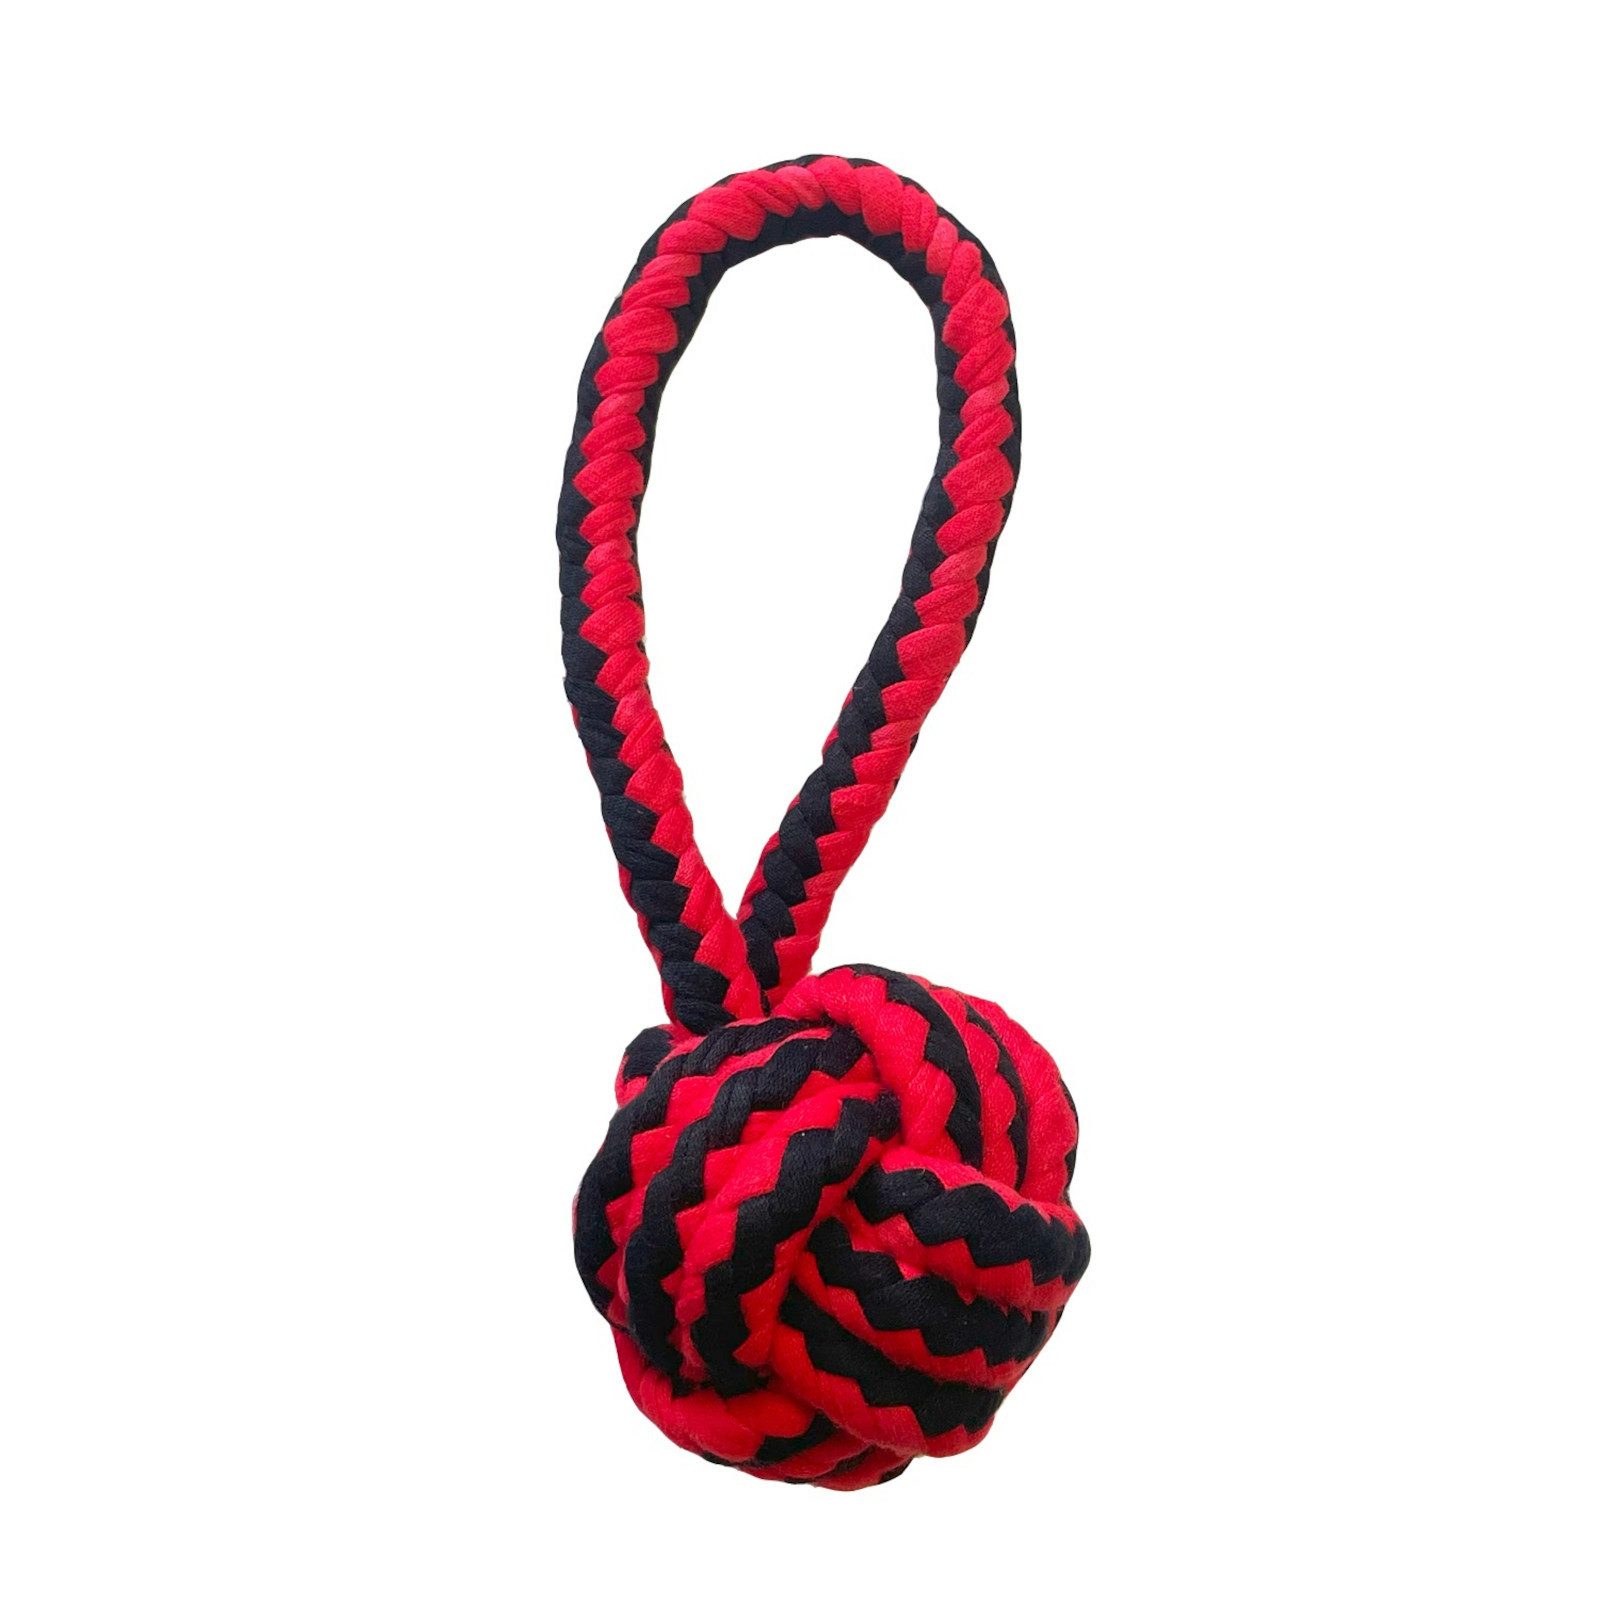 Happypet Tiertau Hundespielzeug Nuts for Knots - Knotenball mit Griff